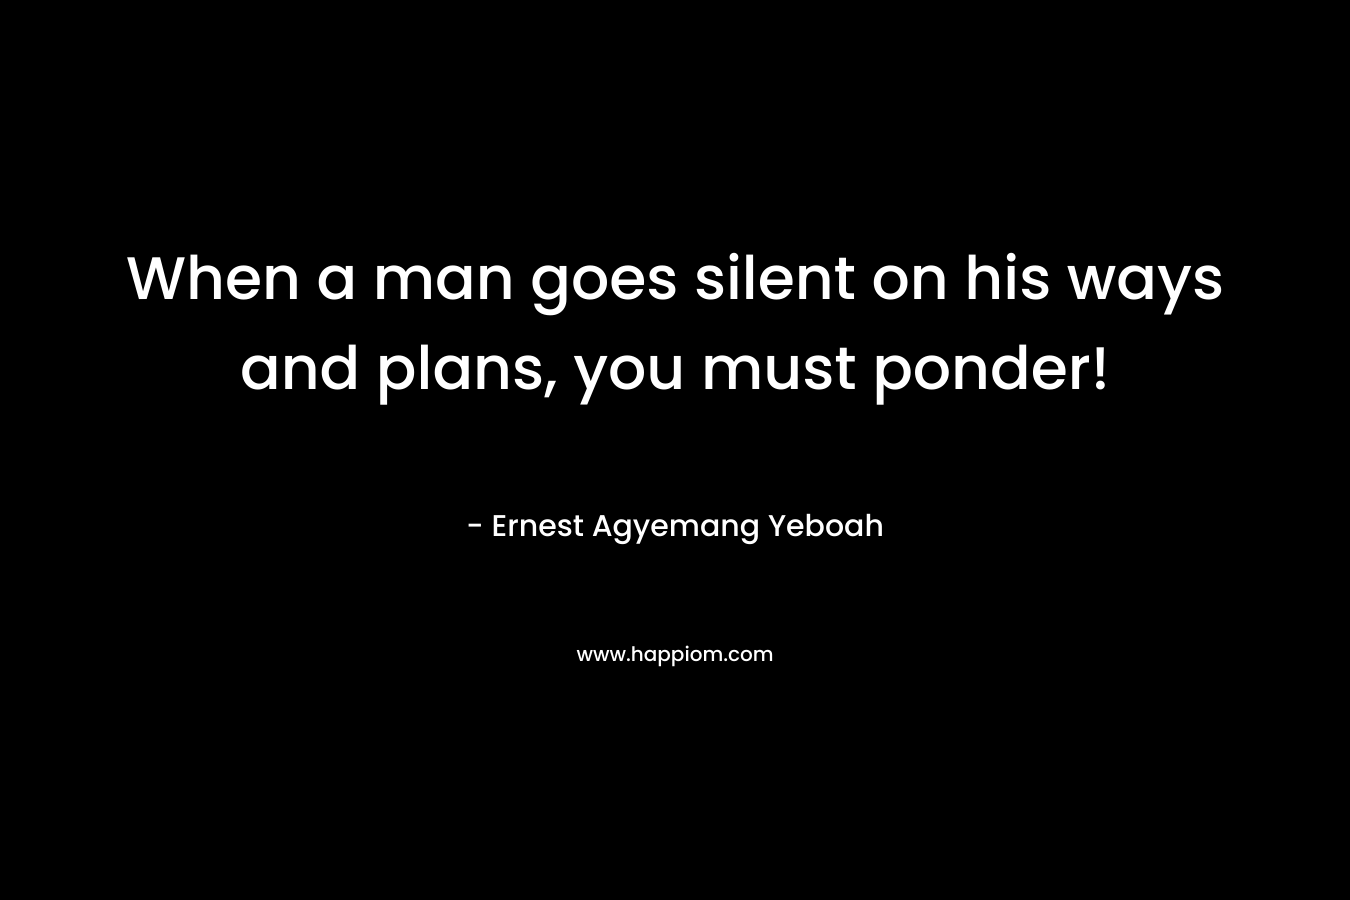 When a man goes silent on his ways and plans, you must ponder!